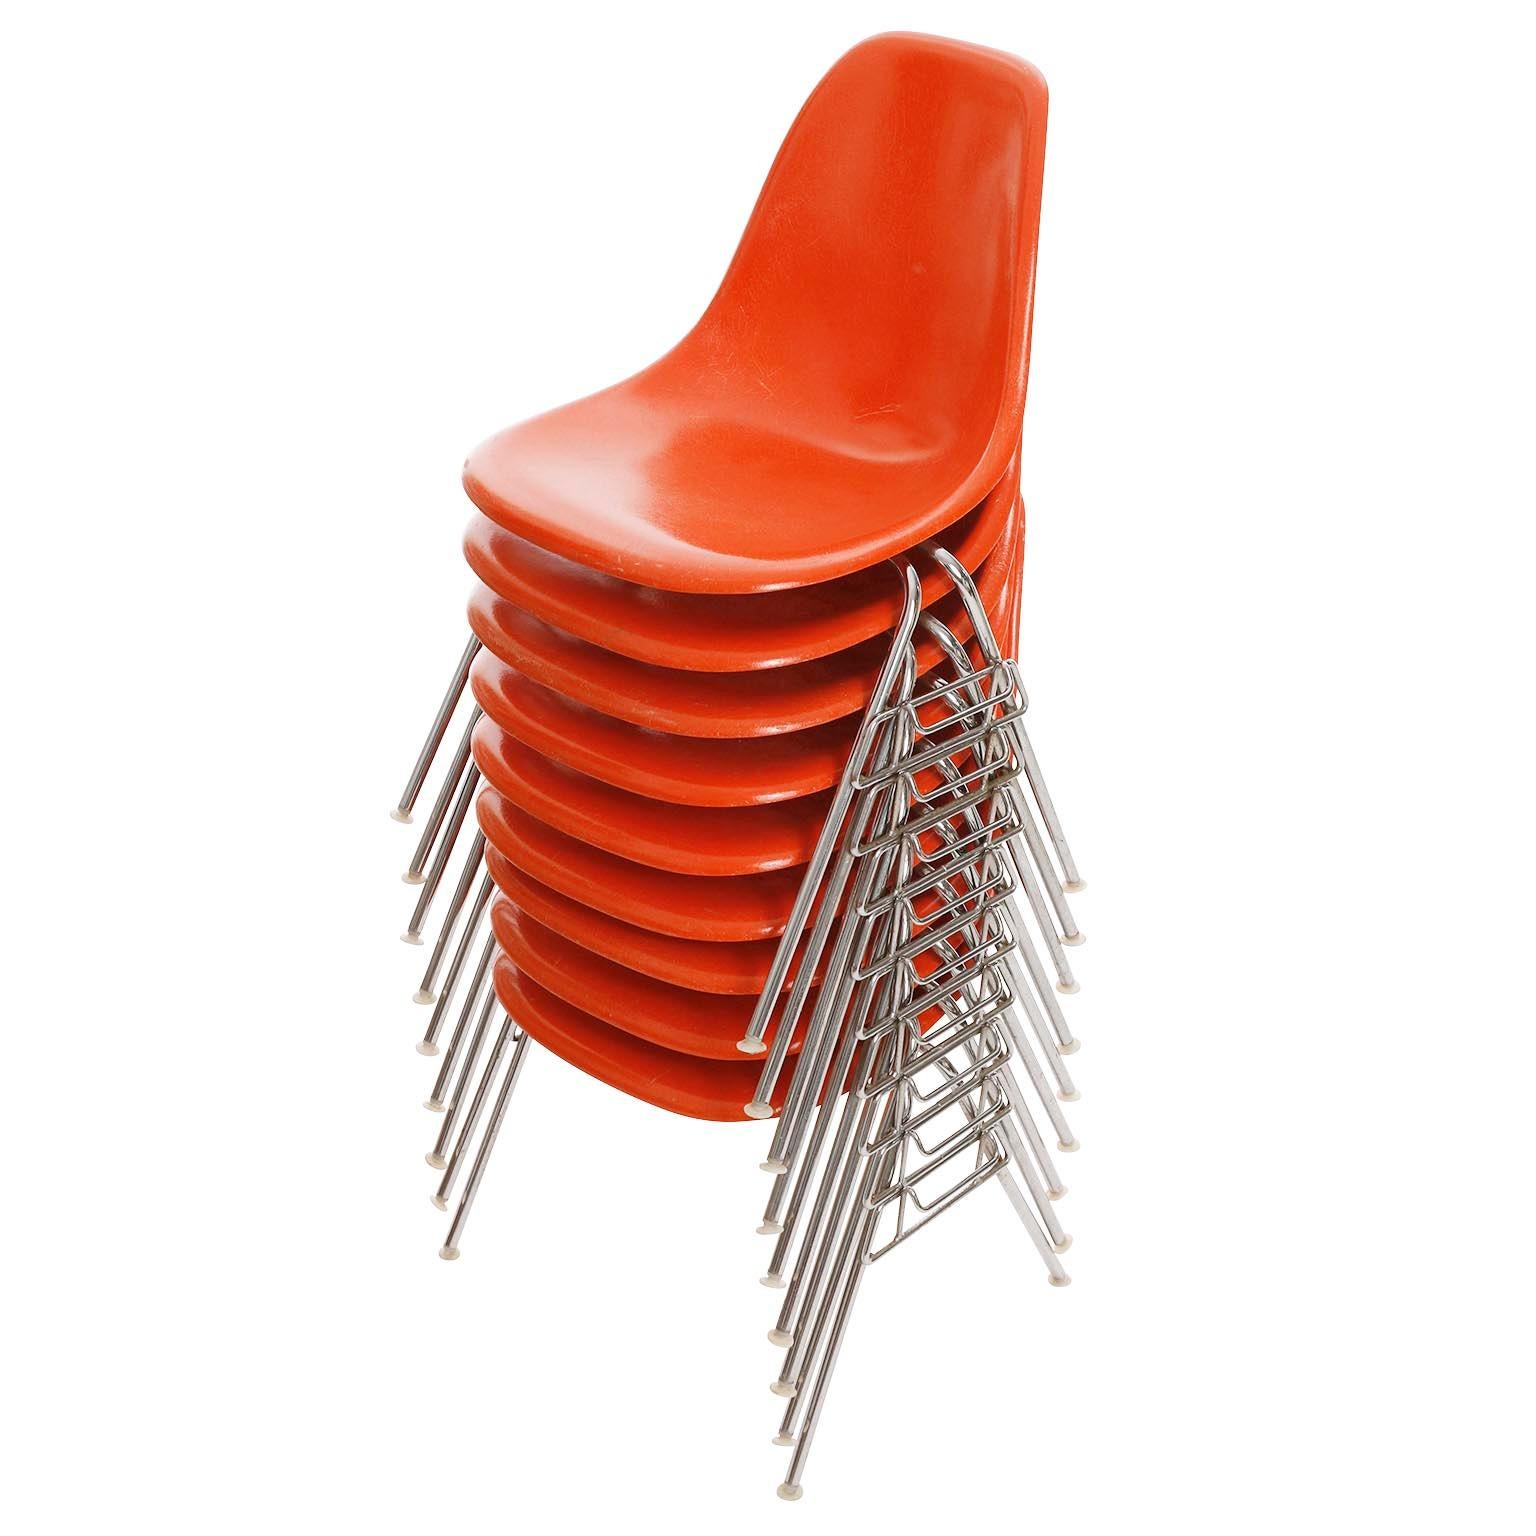 One of 18 stackable dining room chairs by Charles & Ray Eames for Herman Miller, manufactured in midcentury, circa 1970 (late 1960s or early 1970s).
The chairs are marked on the underside with 'herman miller'.
A molded orange fiberglass glass